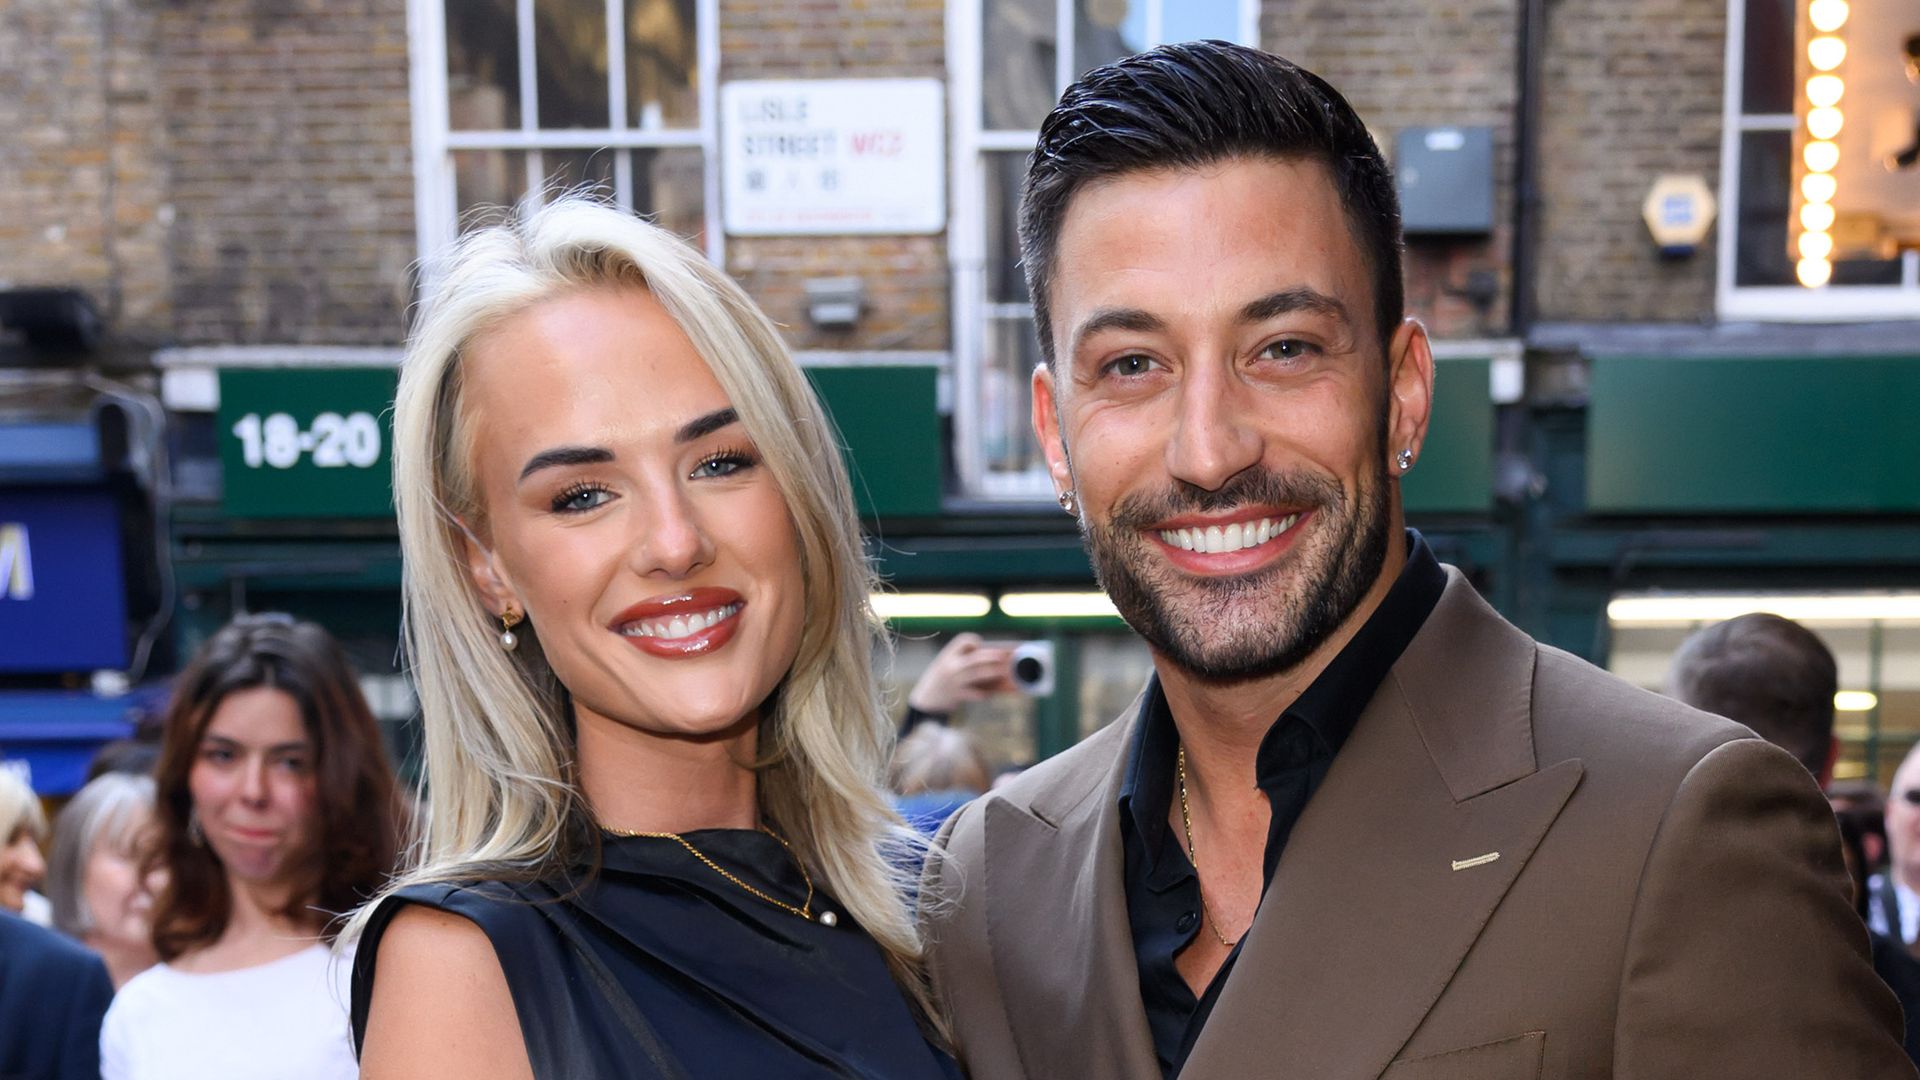 Strictly's Giovanni Pernice's girlfriend Molly Brown looks divine in satin mini dress for red carpet debut